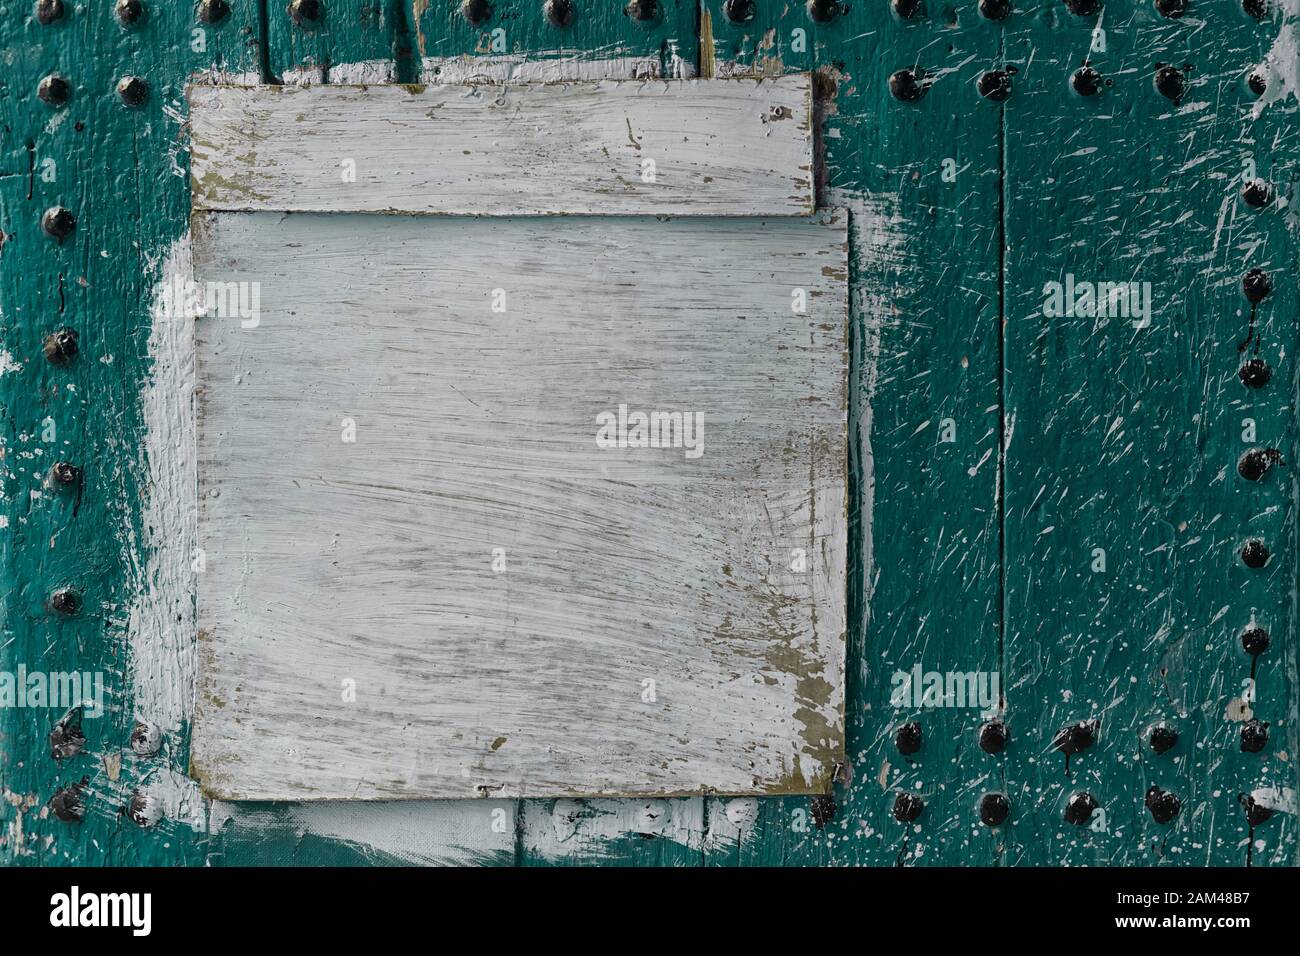 Abstract, detail of an old, mint green, wooden door with a white painted board. Texture background image with copy space. Stock Photo